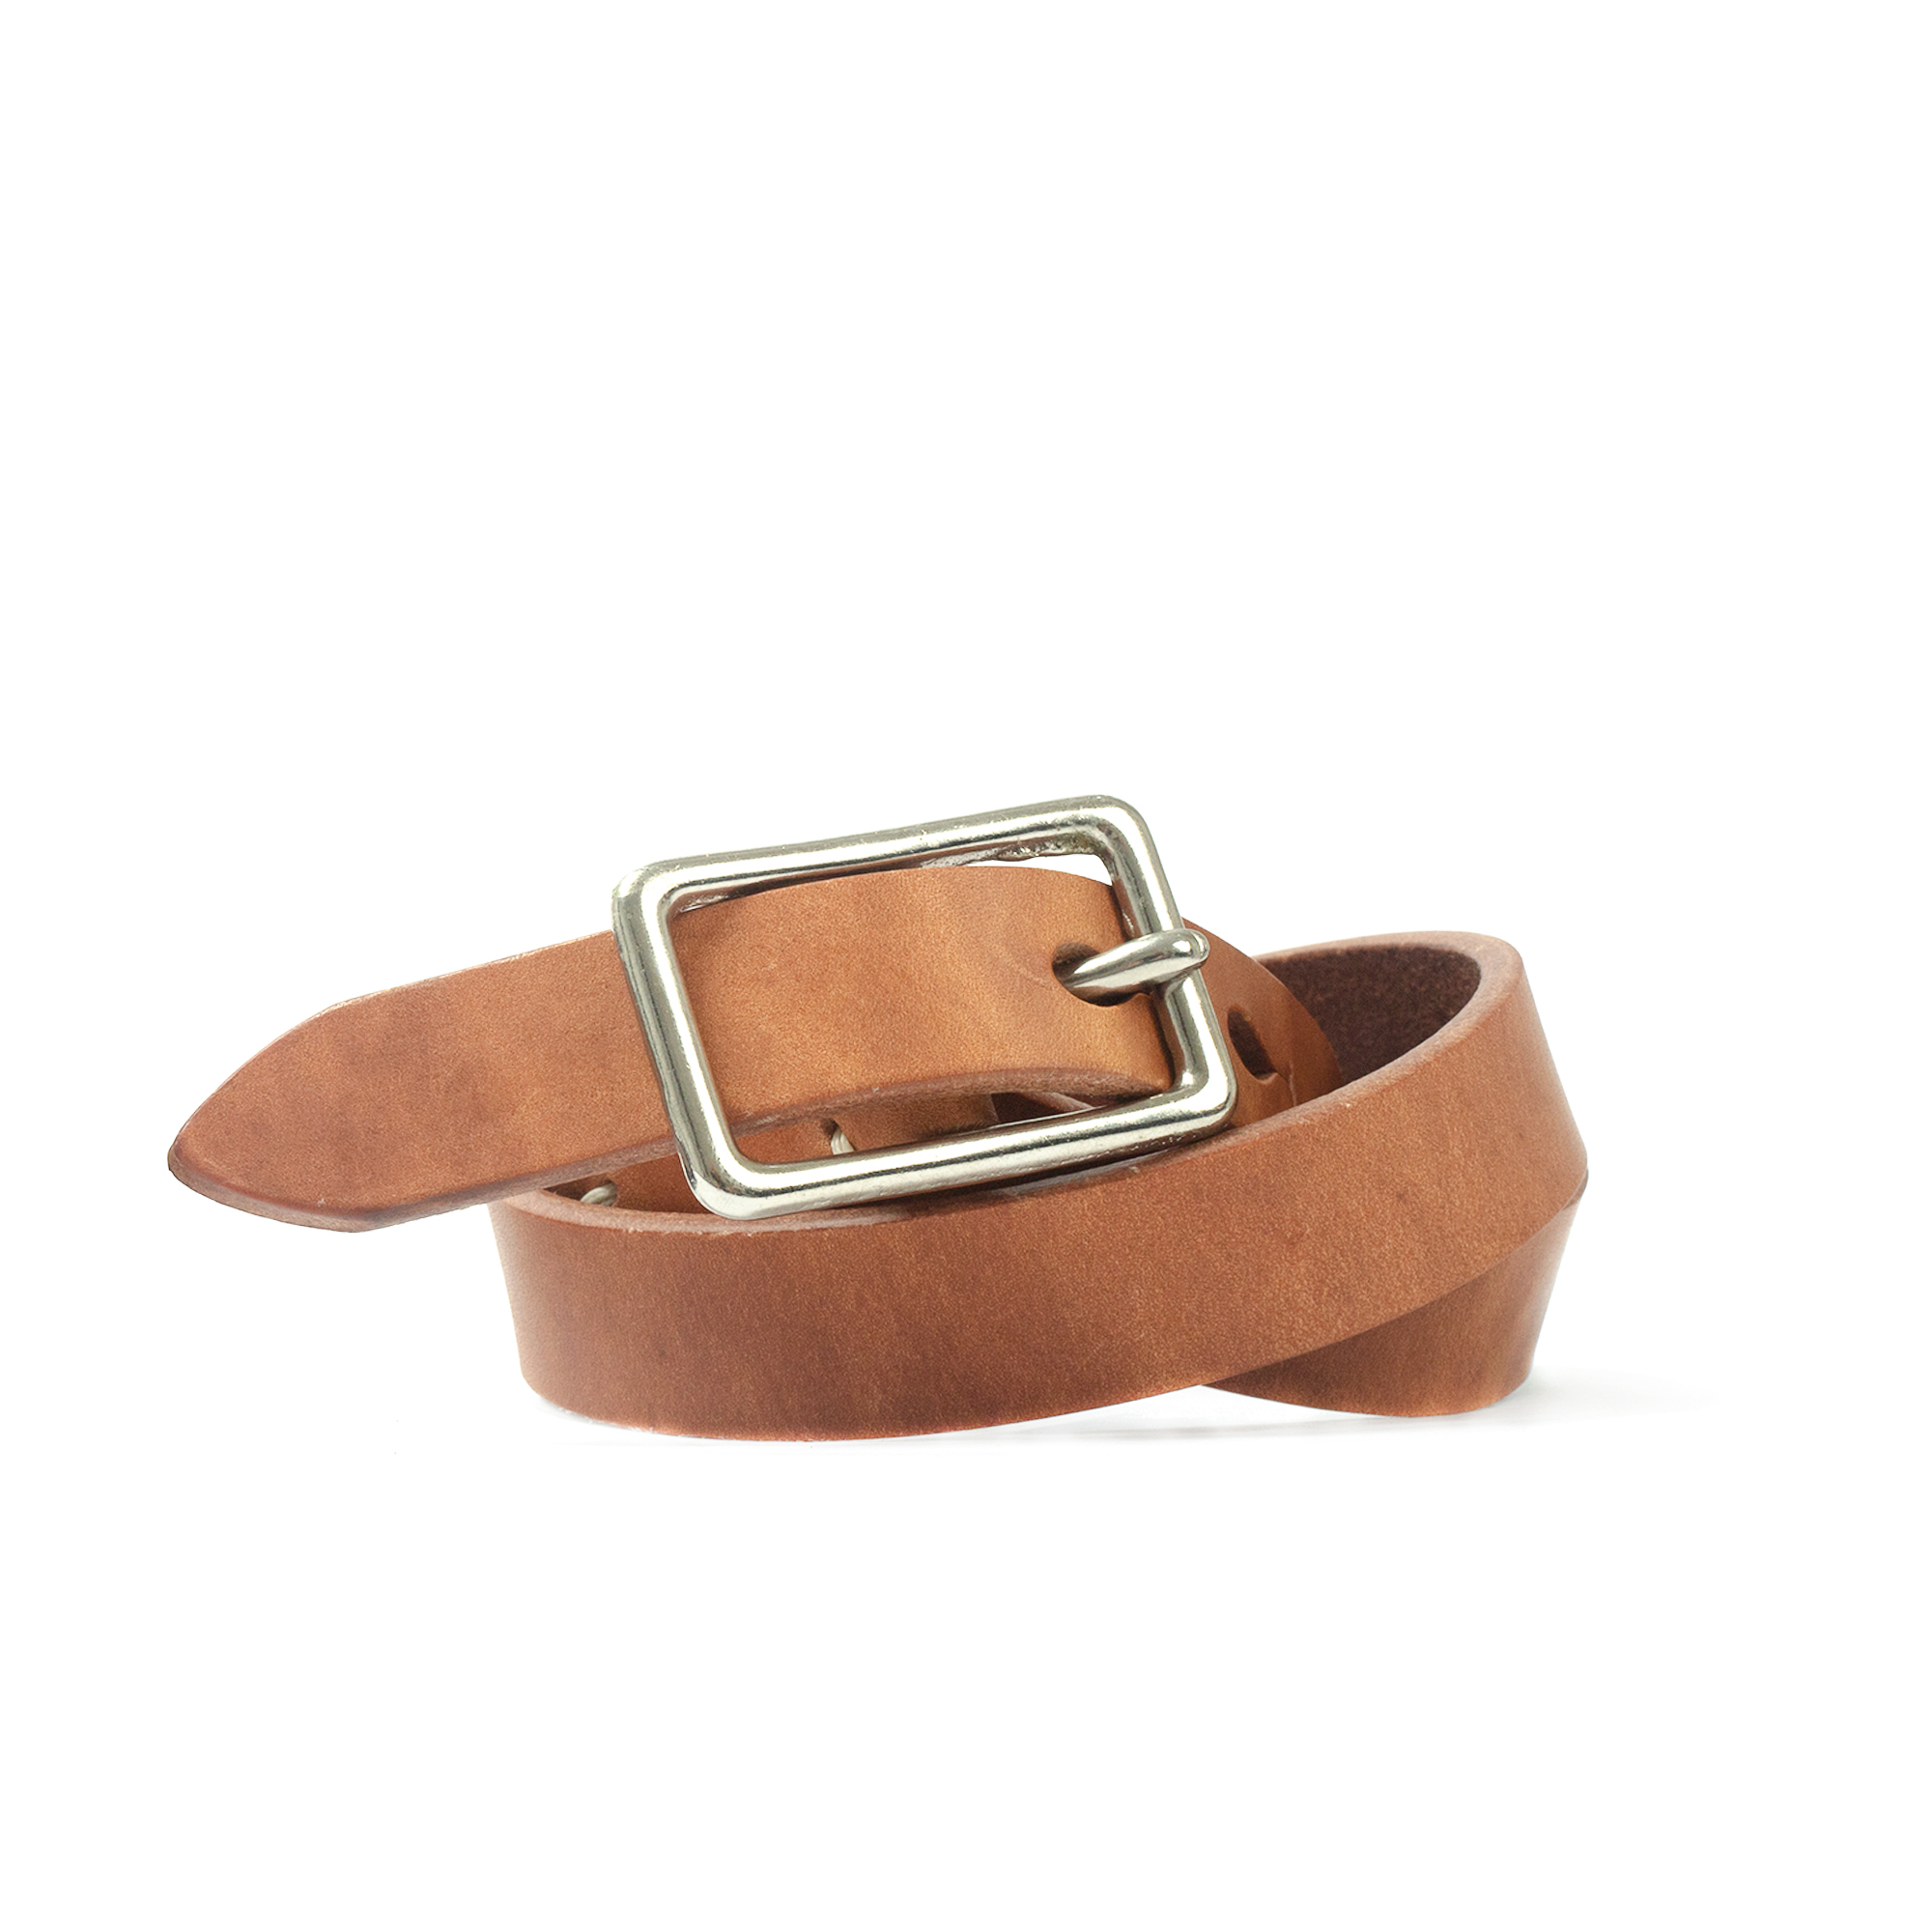 Barns Outfitters - North & Judd Narrow Belt (Beige)